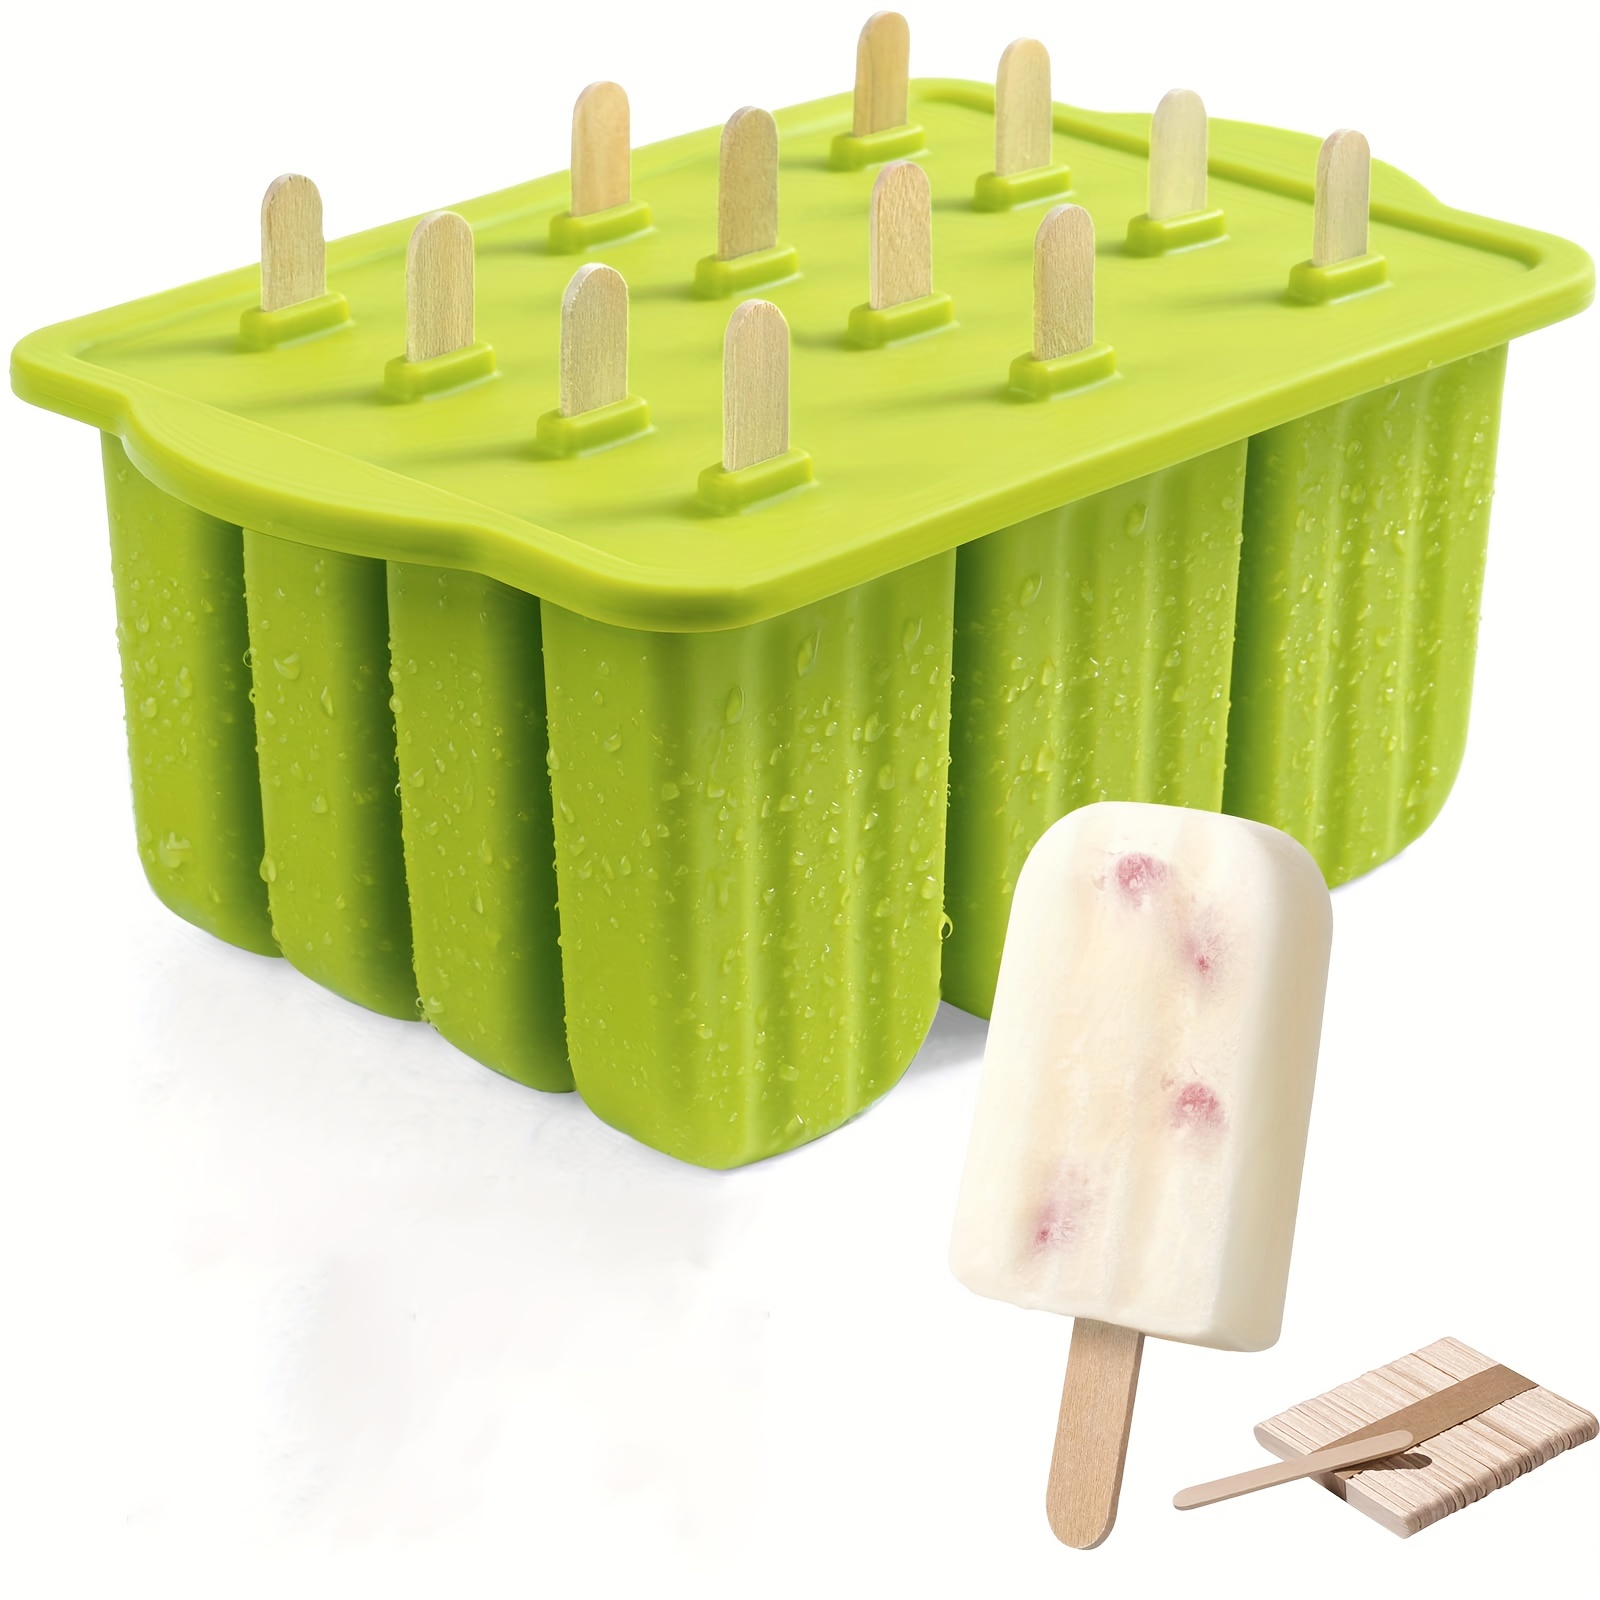 1 Set Popsicles Molds 12 Cavities Silicone Popsicle Molds For Kids Adults  Food Grade Popsicle Maker Molds Bpa Free Ice Pop Mold Homemade Ice Pop Maker  With Popsicle Sticks Popsicle Bags